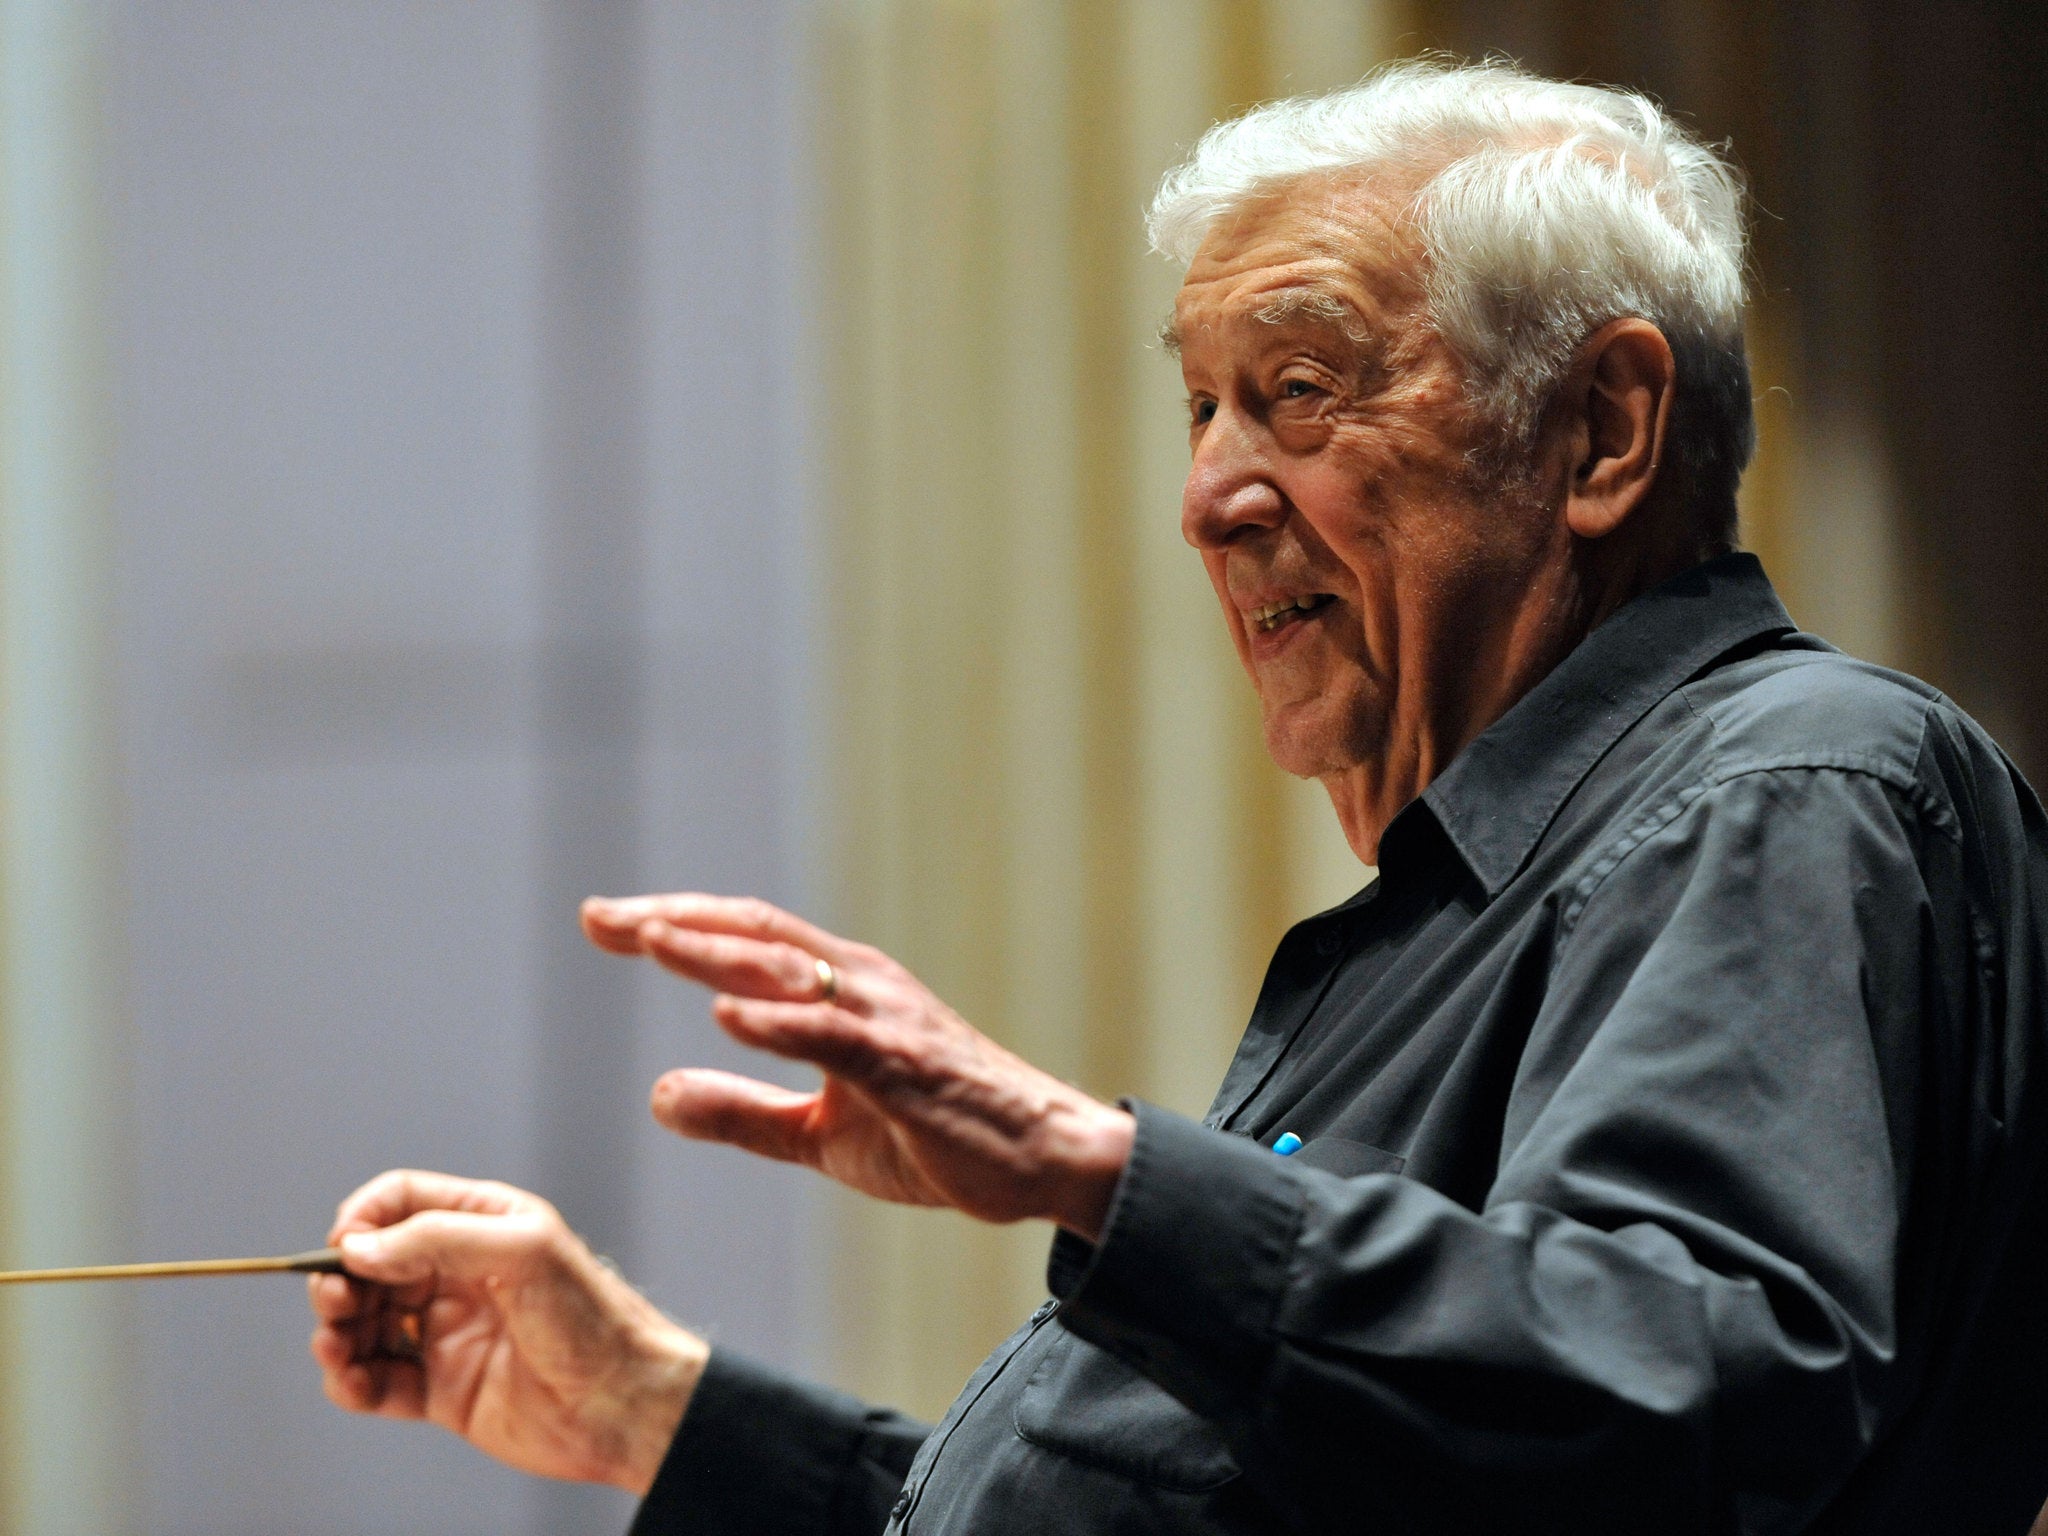 Pulitzer Prize-winning composer and horn player - who fused jazz and classical music - Gunther Schuller dies aged 89